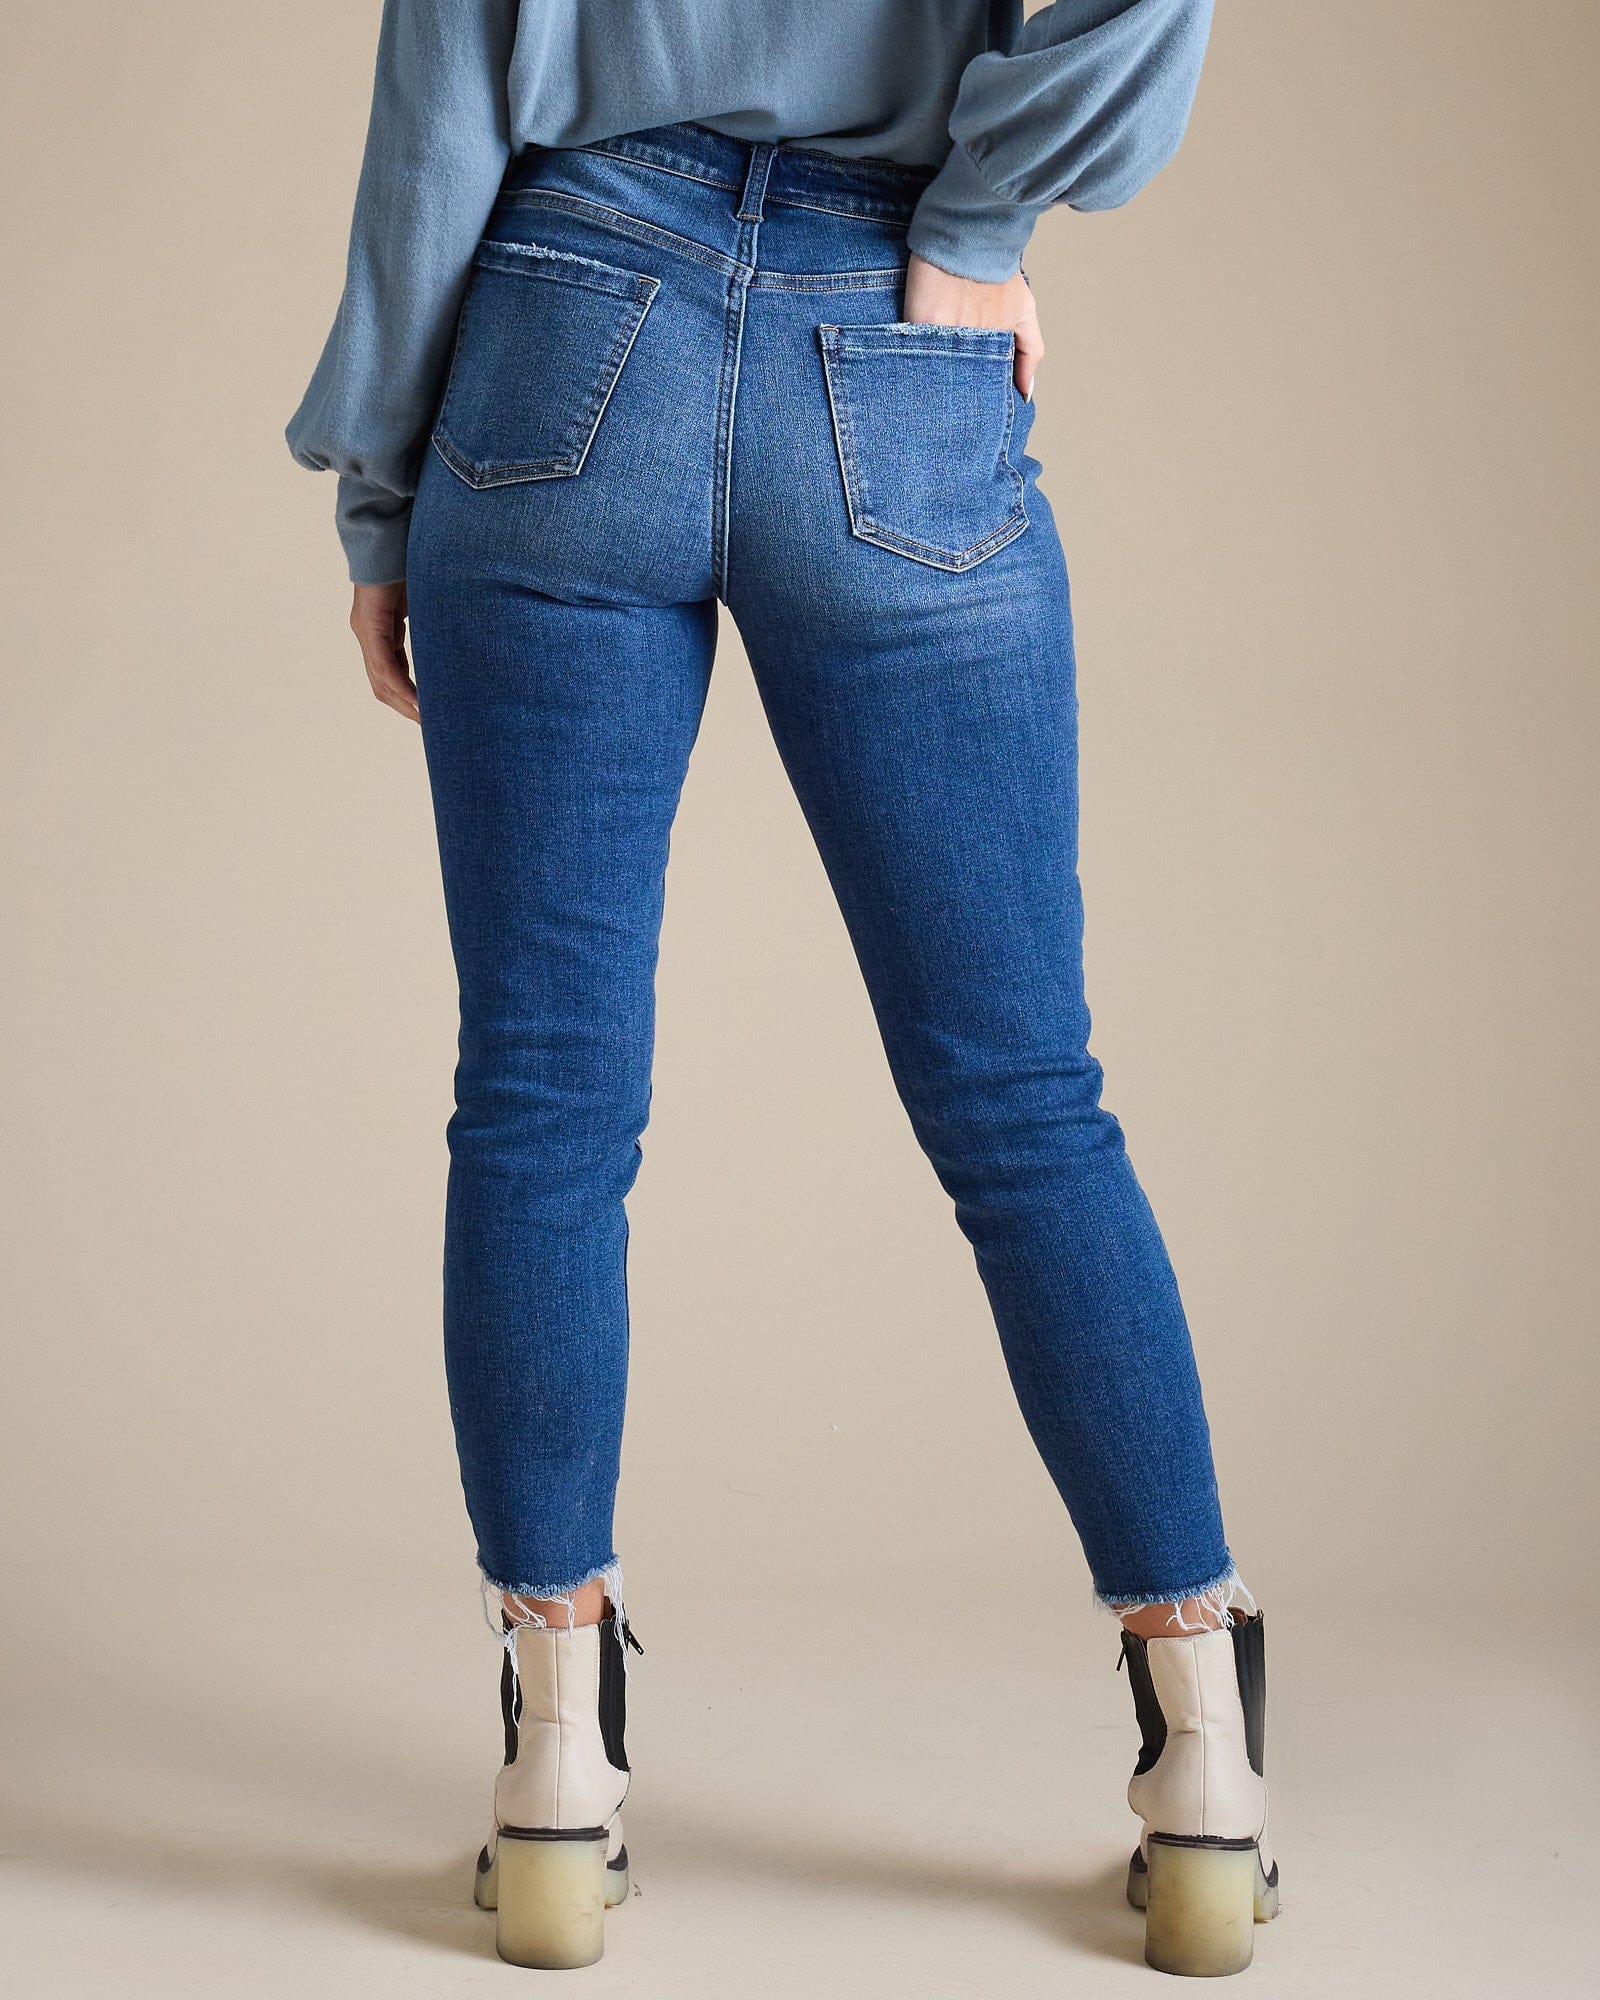 Woman in blue mid-rise skinny jeans